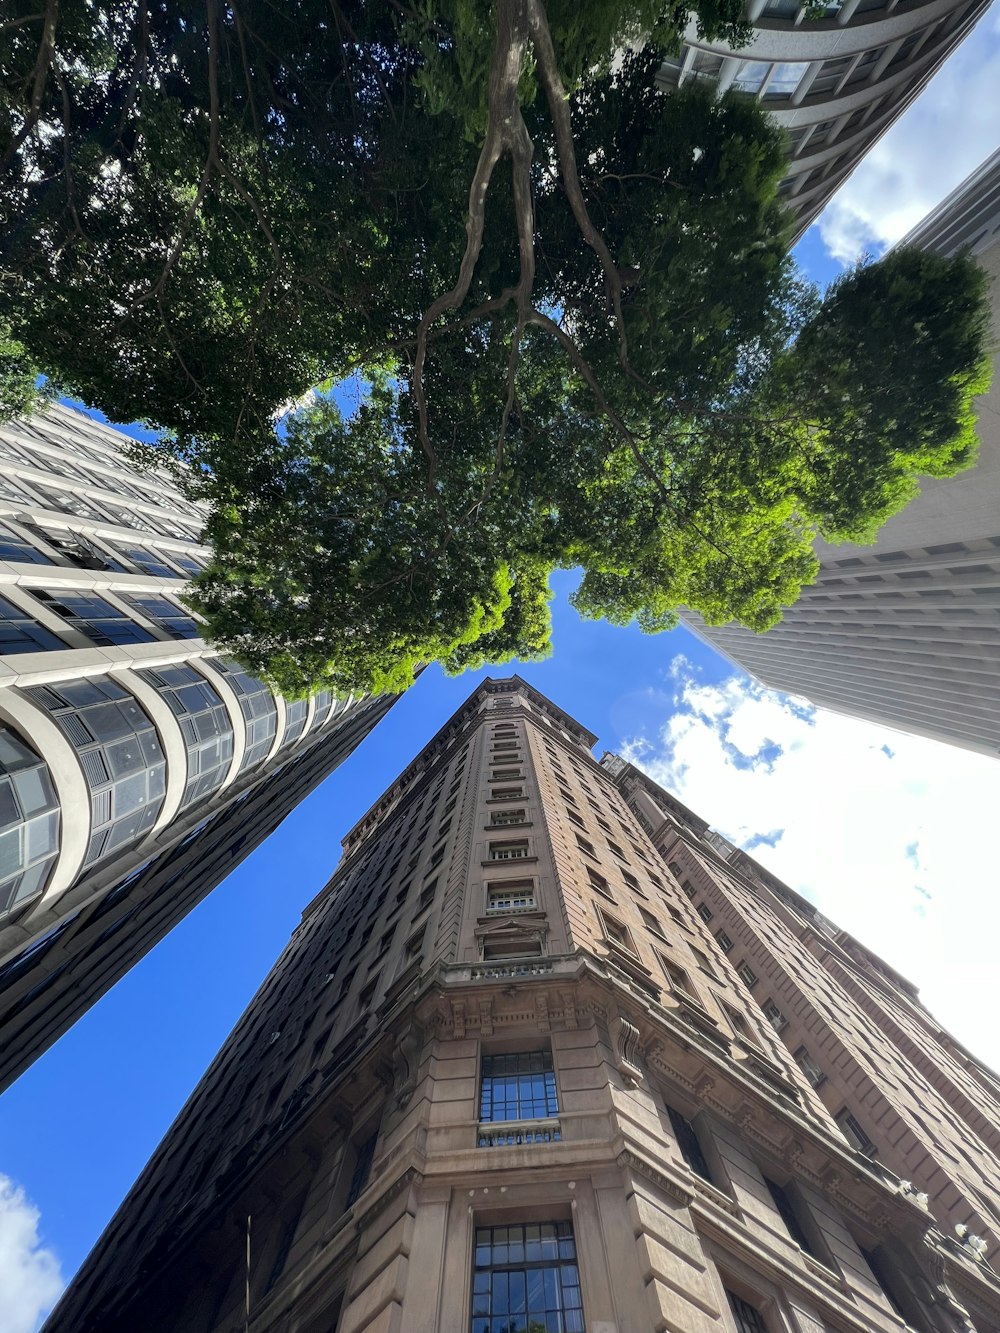 looking up at the top of a tall building